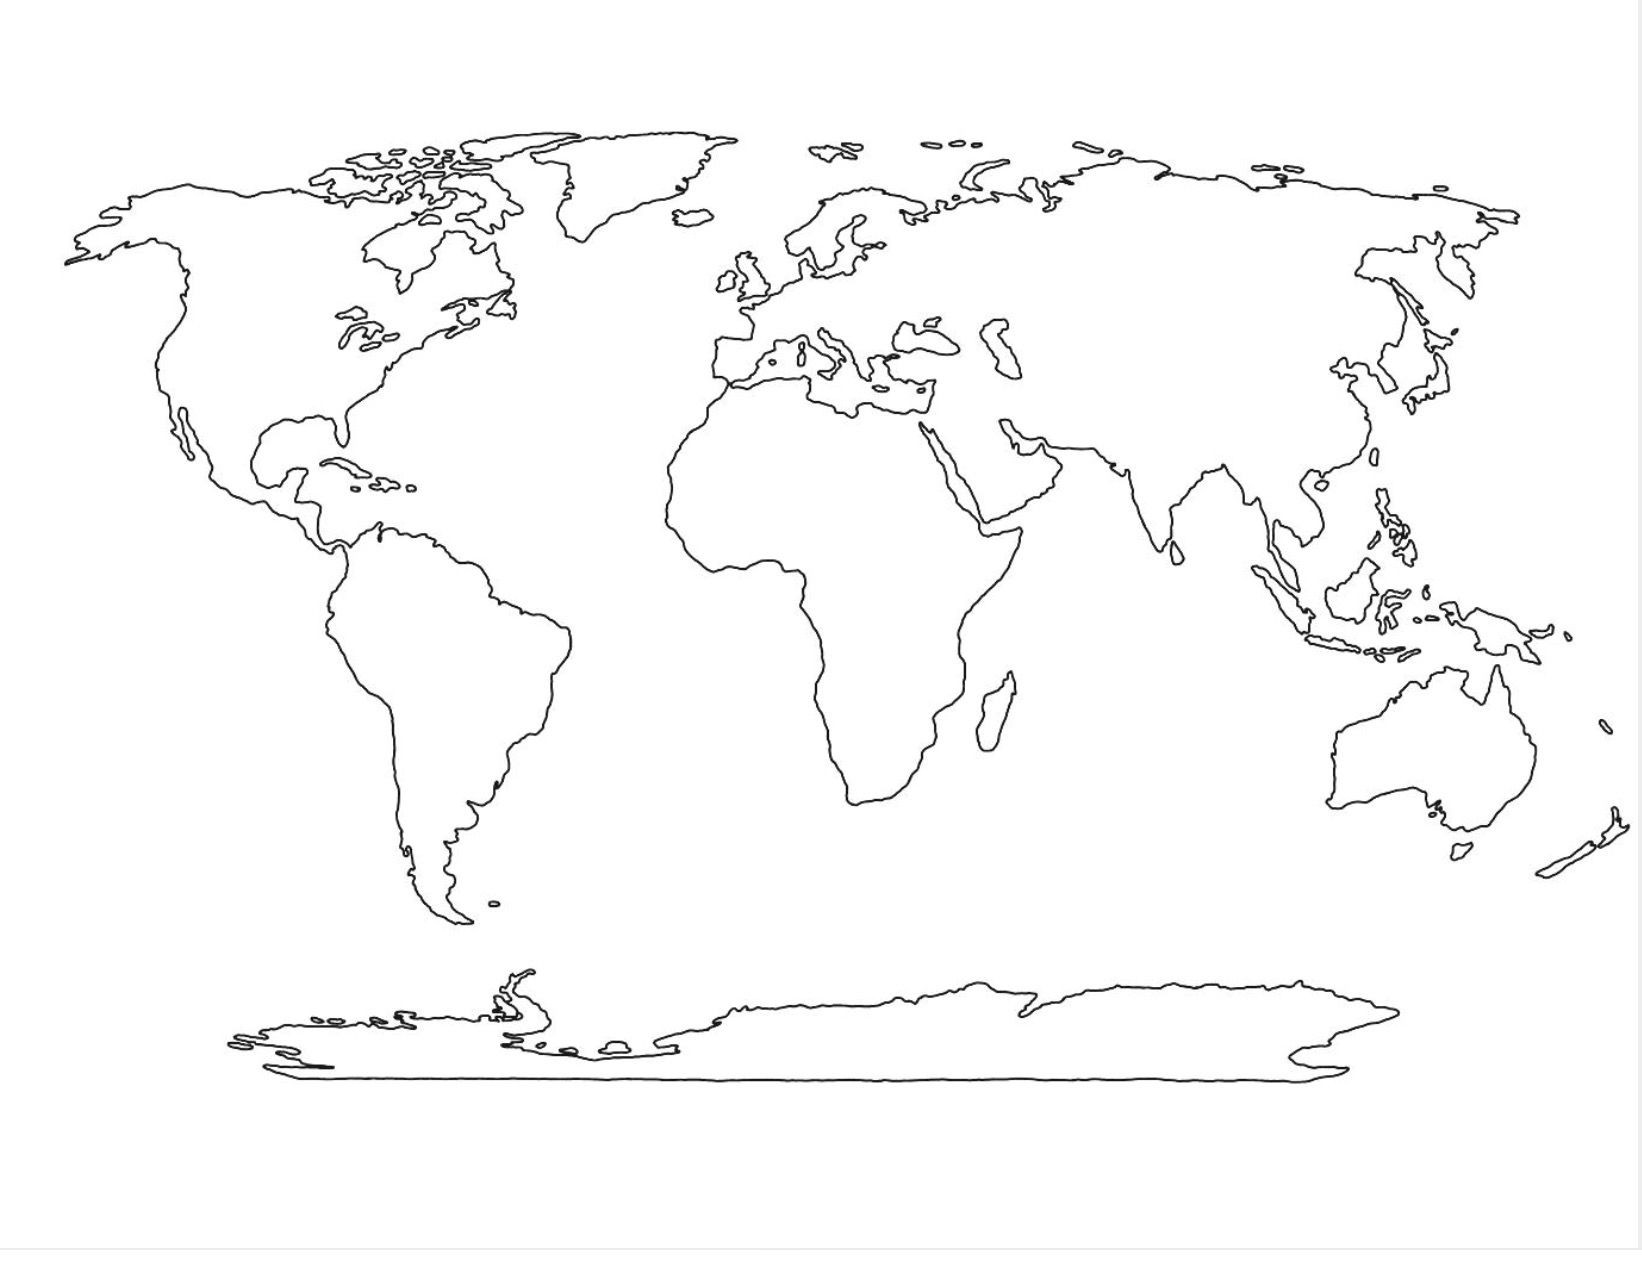 Printable World Map 8.5 X 11 New How To Draw Map World For How To Draw A World Map